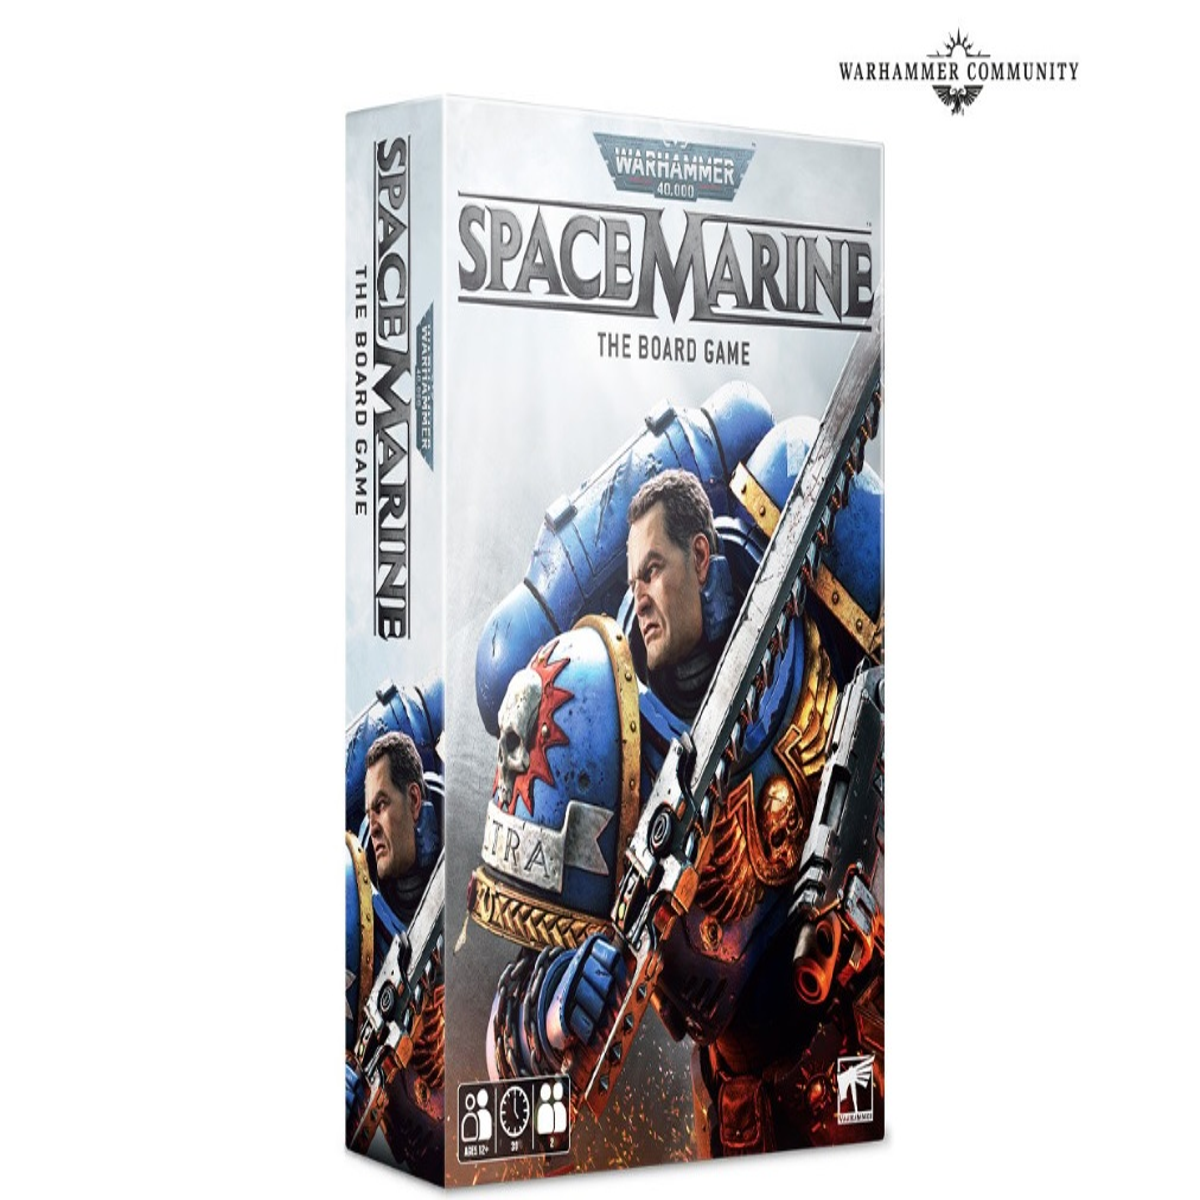 Warhammer 40,000 Space Marine The Board Game is a board game based on a  video game based on a board game